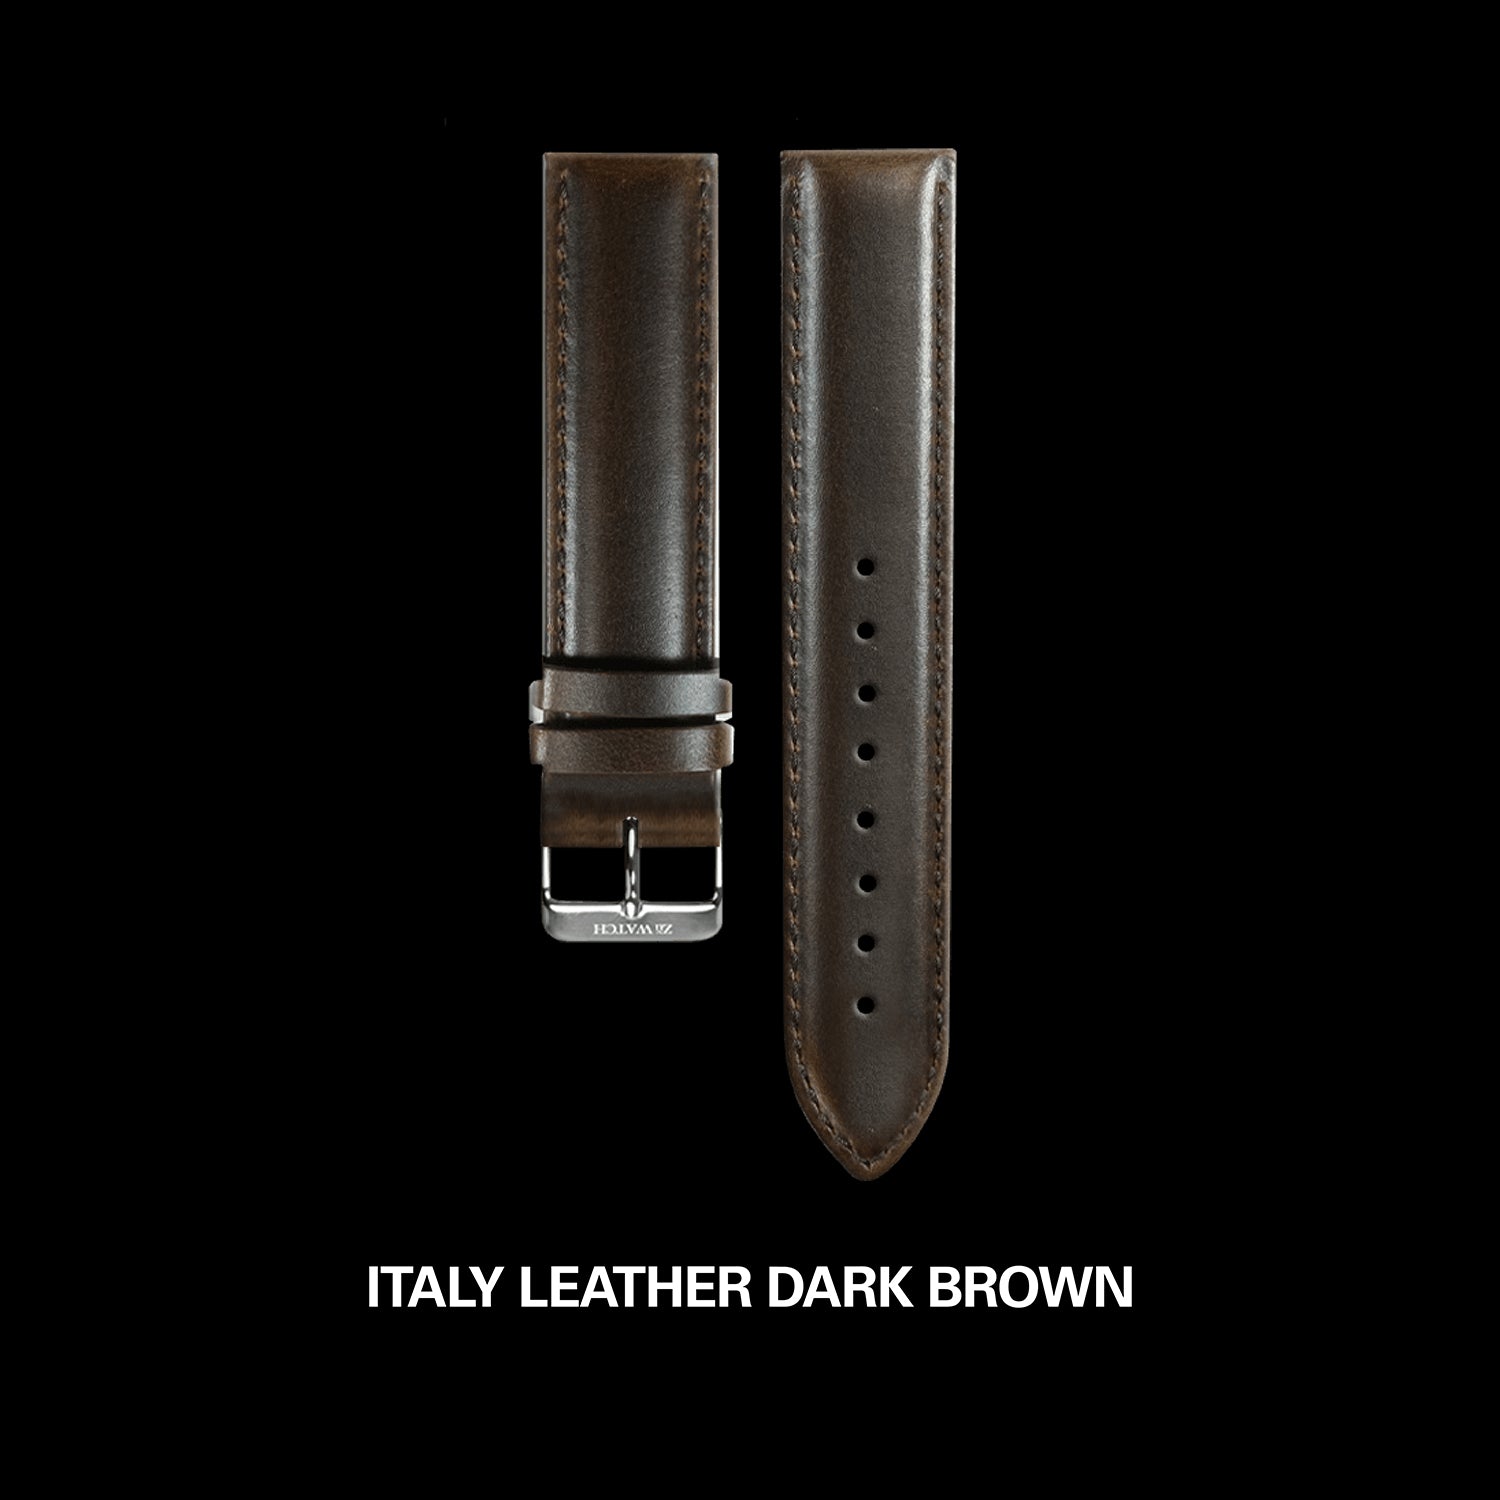 ITALY LEATHER｜DARK BROWN｜STRAP SERIES - yunivers hsieh